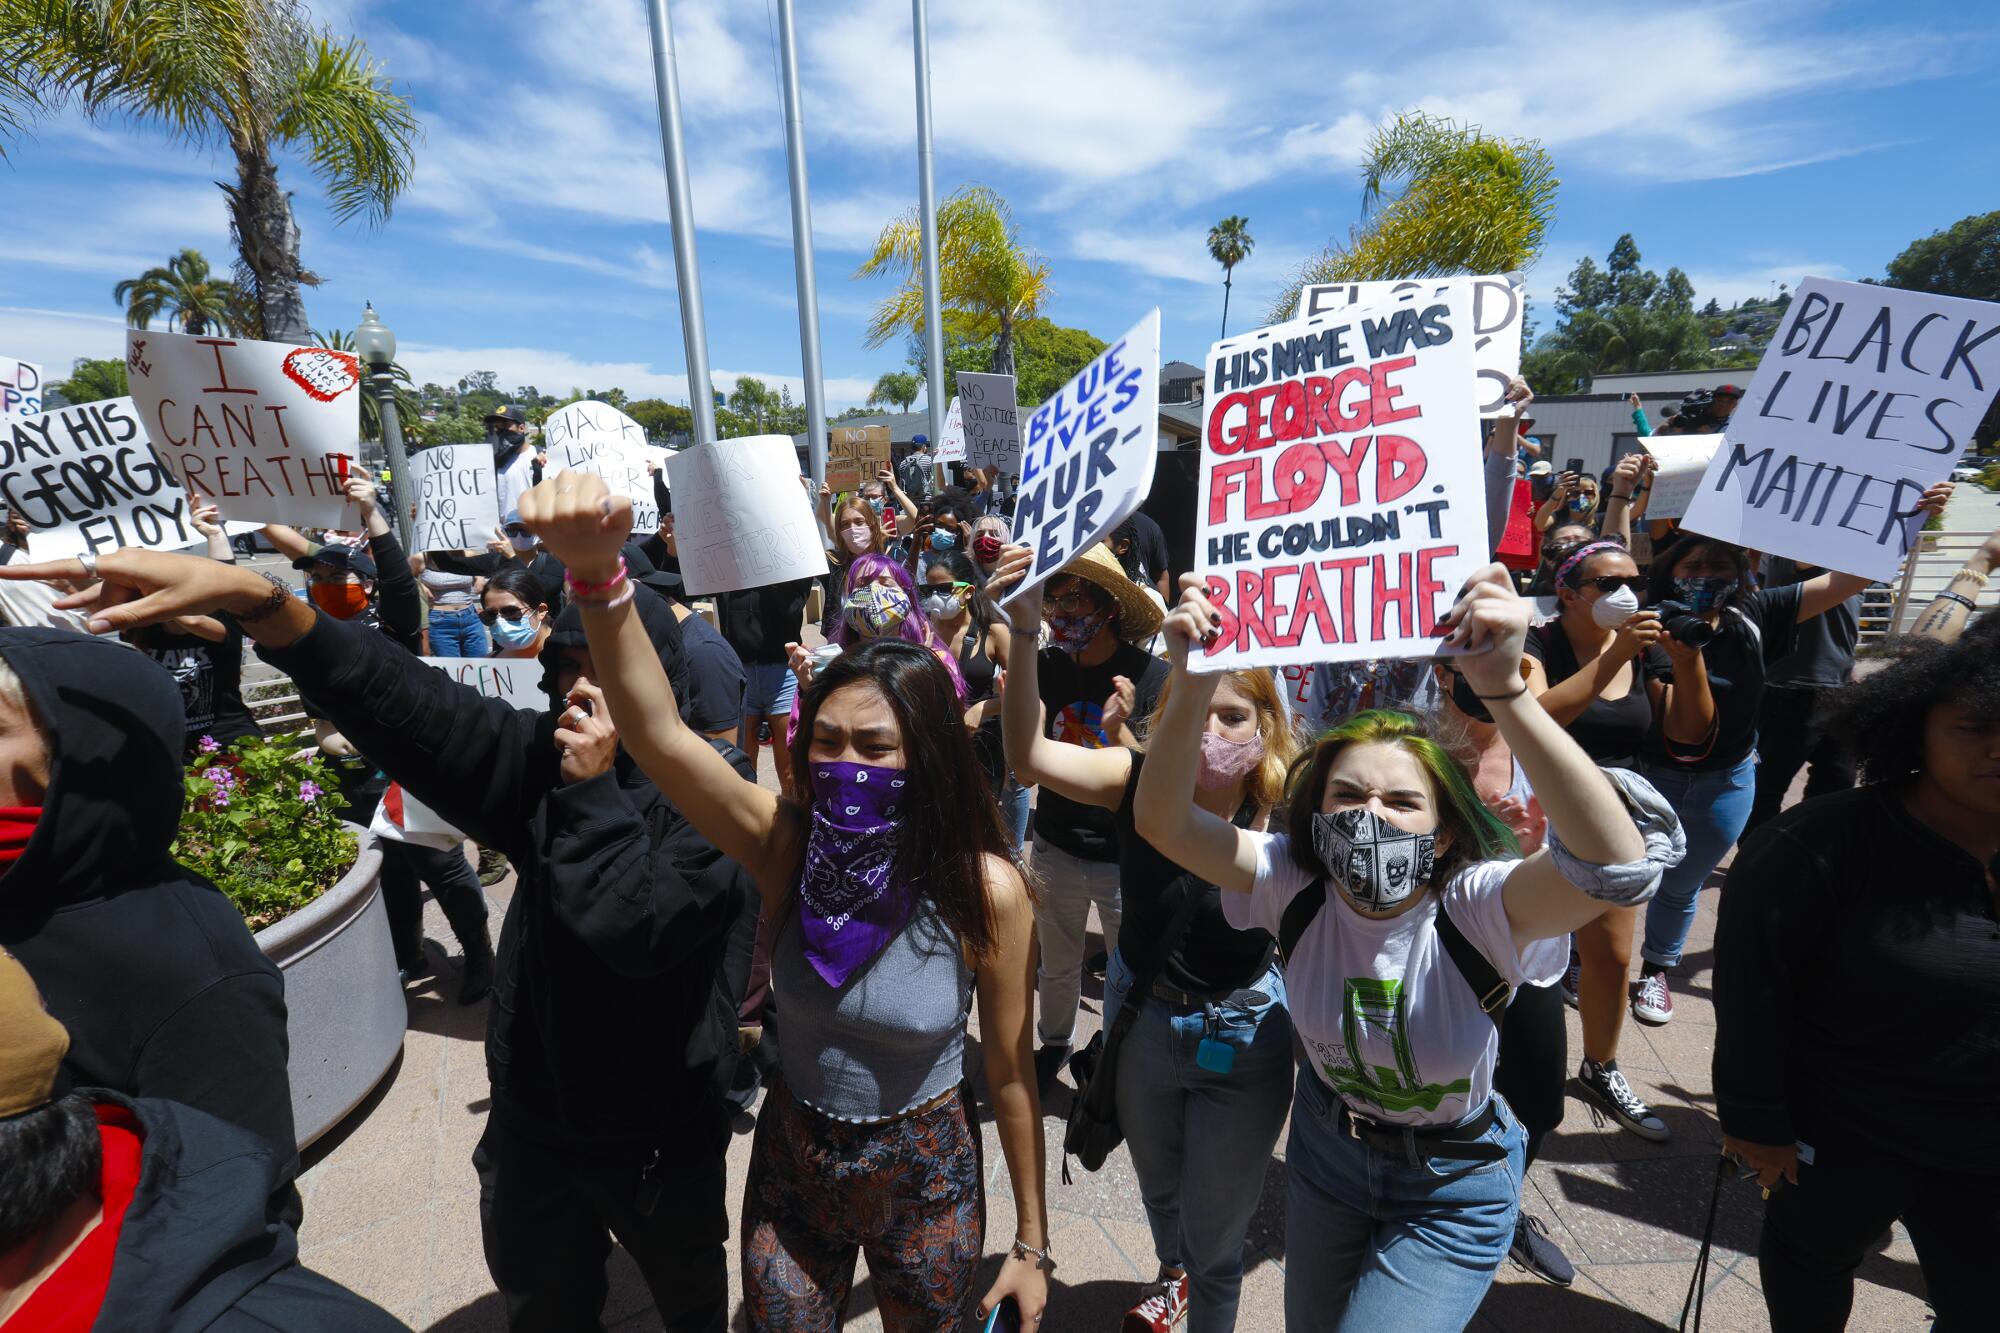 Protestors on Saturday began their protest in front of the La Mesa Police Department. The group eventually marched along the nearby streets, and later gained access to Interstate 8 where they temporary closed off traffic in both directions.